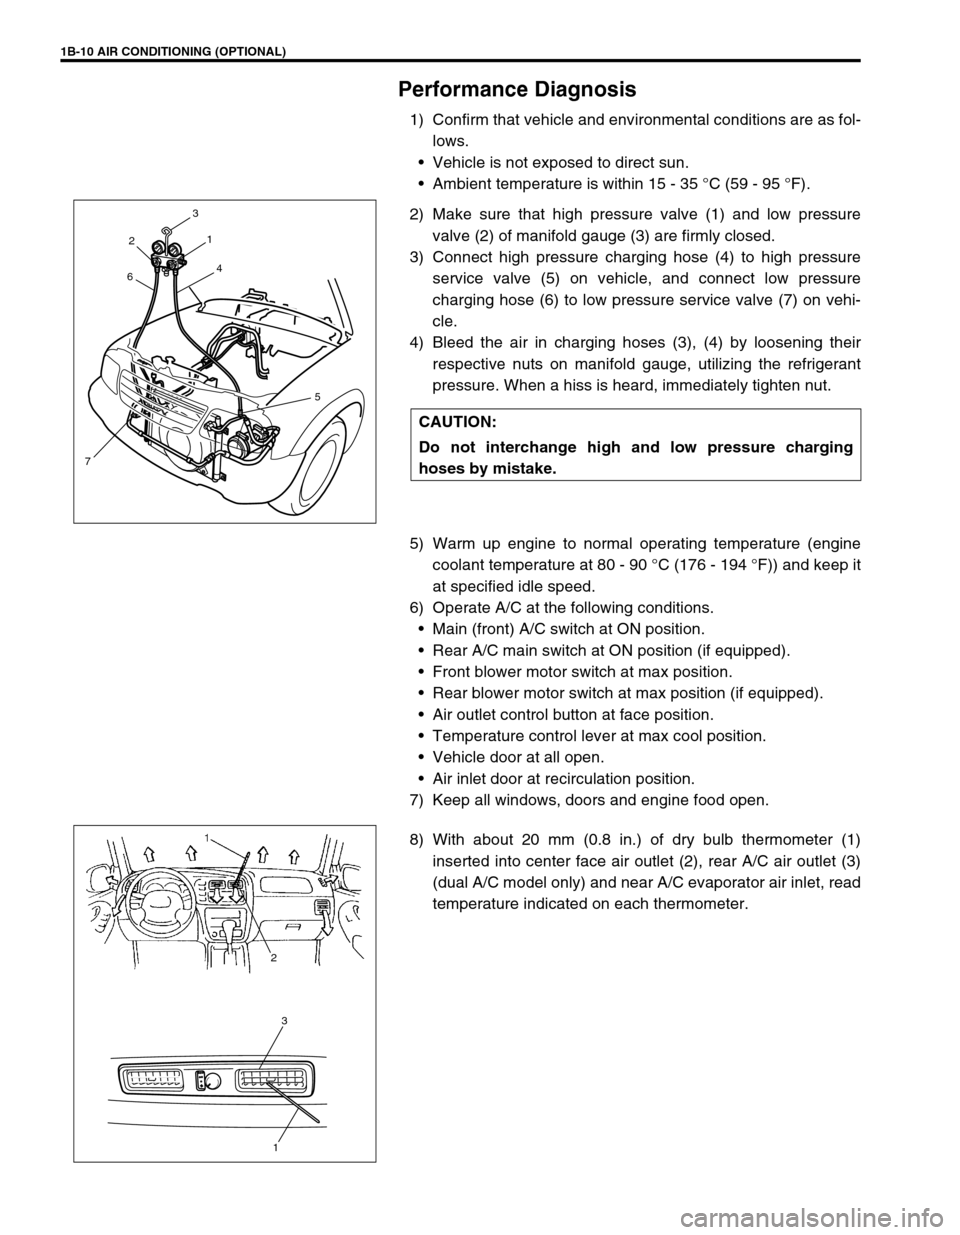 SUZUKI GRAND VITARA 1999 2.G Owners Manual 1B-10 AIR CONDITIONING (OPTIONAL)
Performance Diagnosis
1) Confirm that vehicle and environmental conditions are as fol-
lows. 
Vehicle is not exposed to direct sun. 
Ambient temperature is within 1